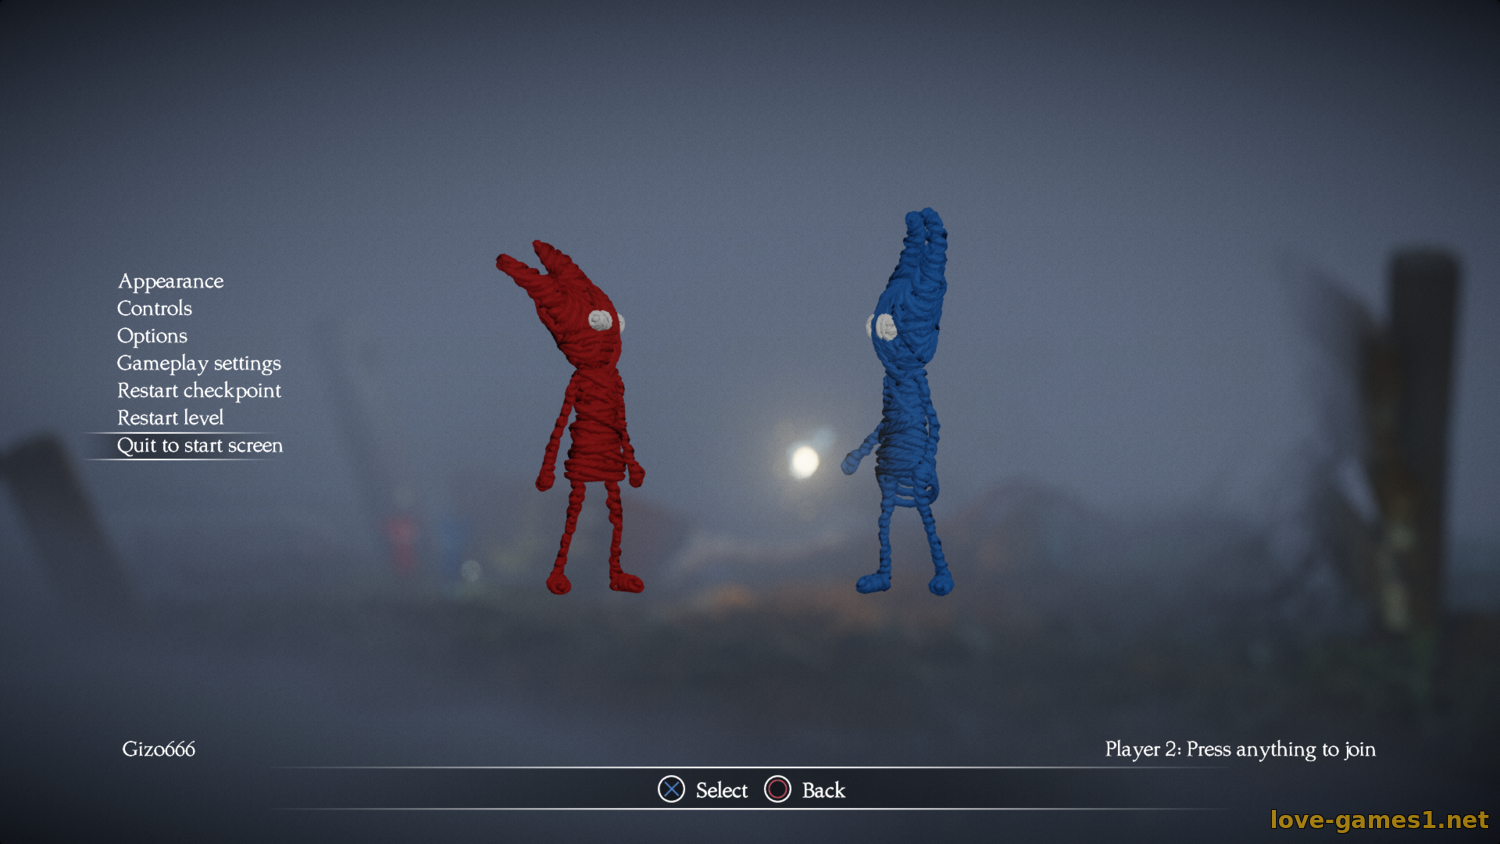 Unravel two ps4. Unravel two по сети. Unravel two управление на ps4. Unravel two ЛОР.